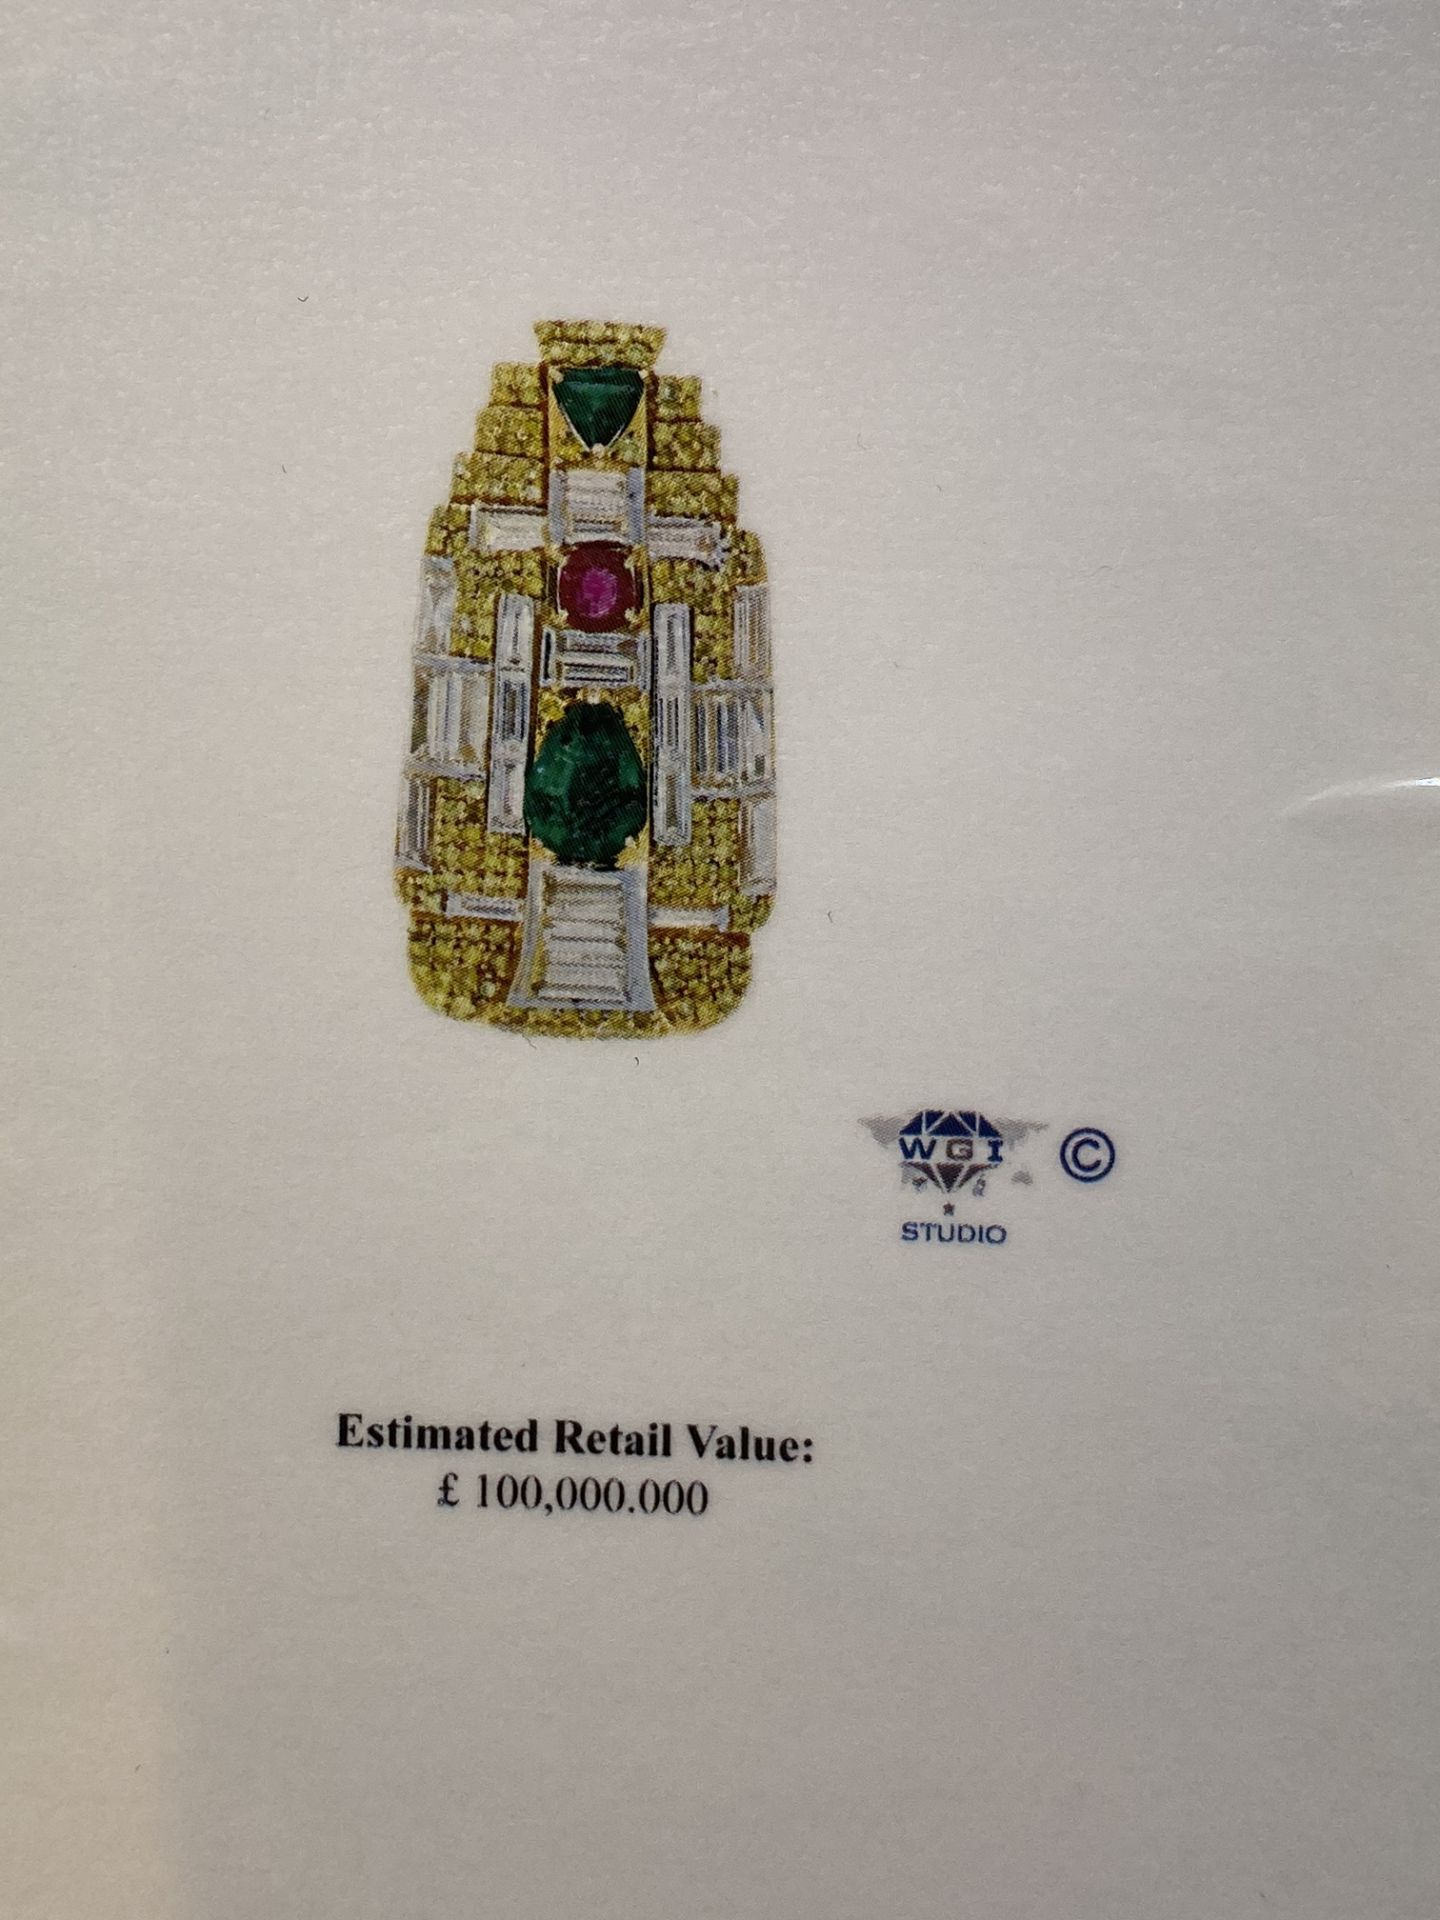 FINE DIAMOND, EMERALD & RUBY PENDANT WITH W.G.I £100,000 VALUATION - 30.9 GRAMS ** MUST SEE ** - Image 12 of 25